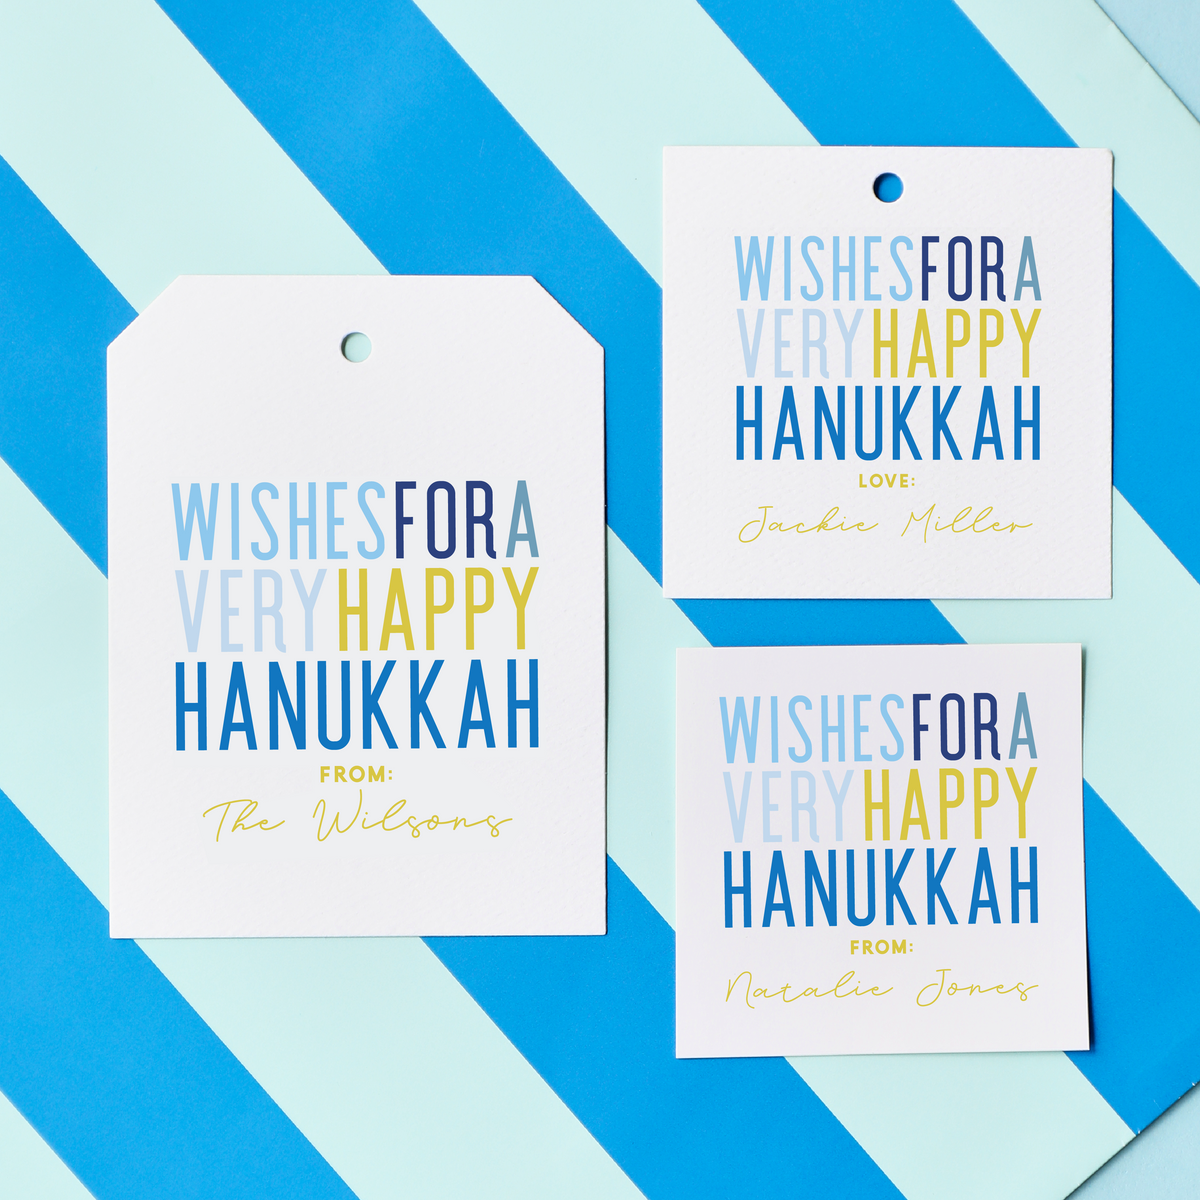 Wishes for a Very Happy Hanukkah